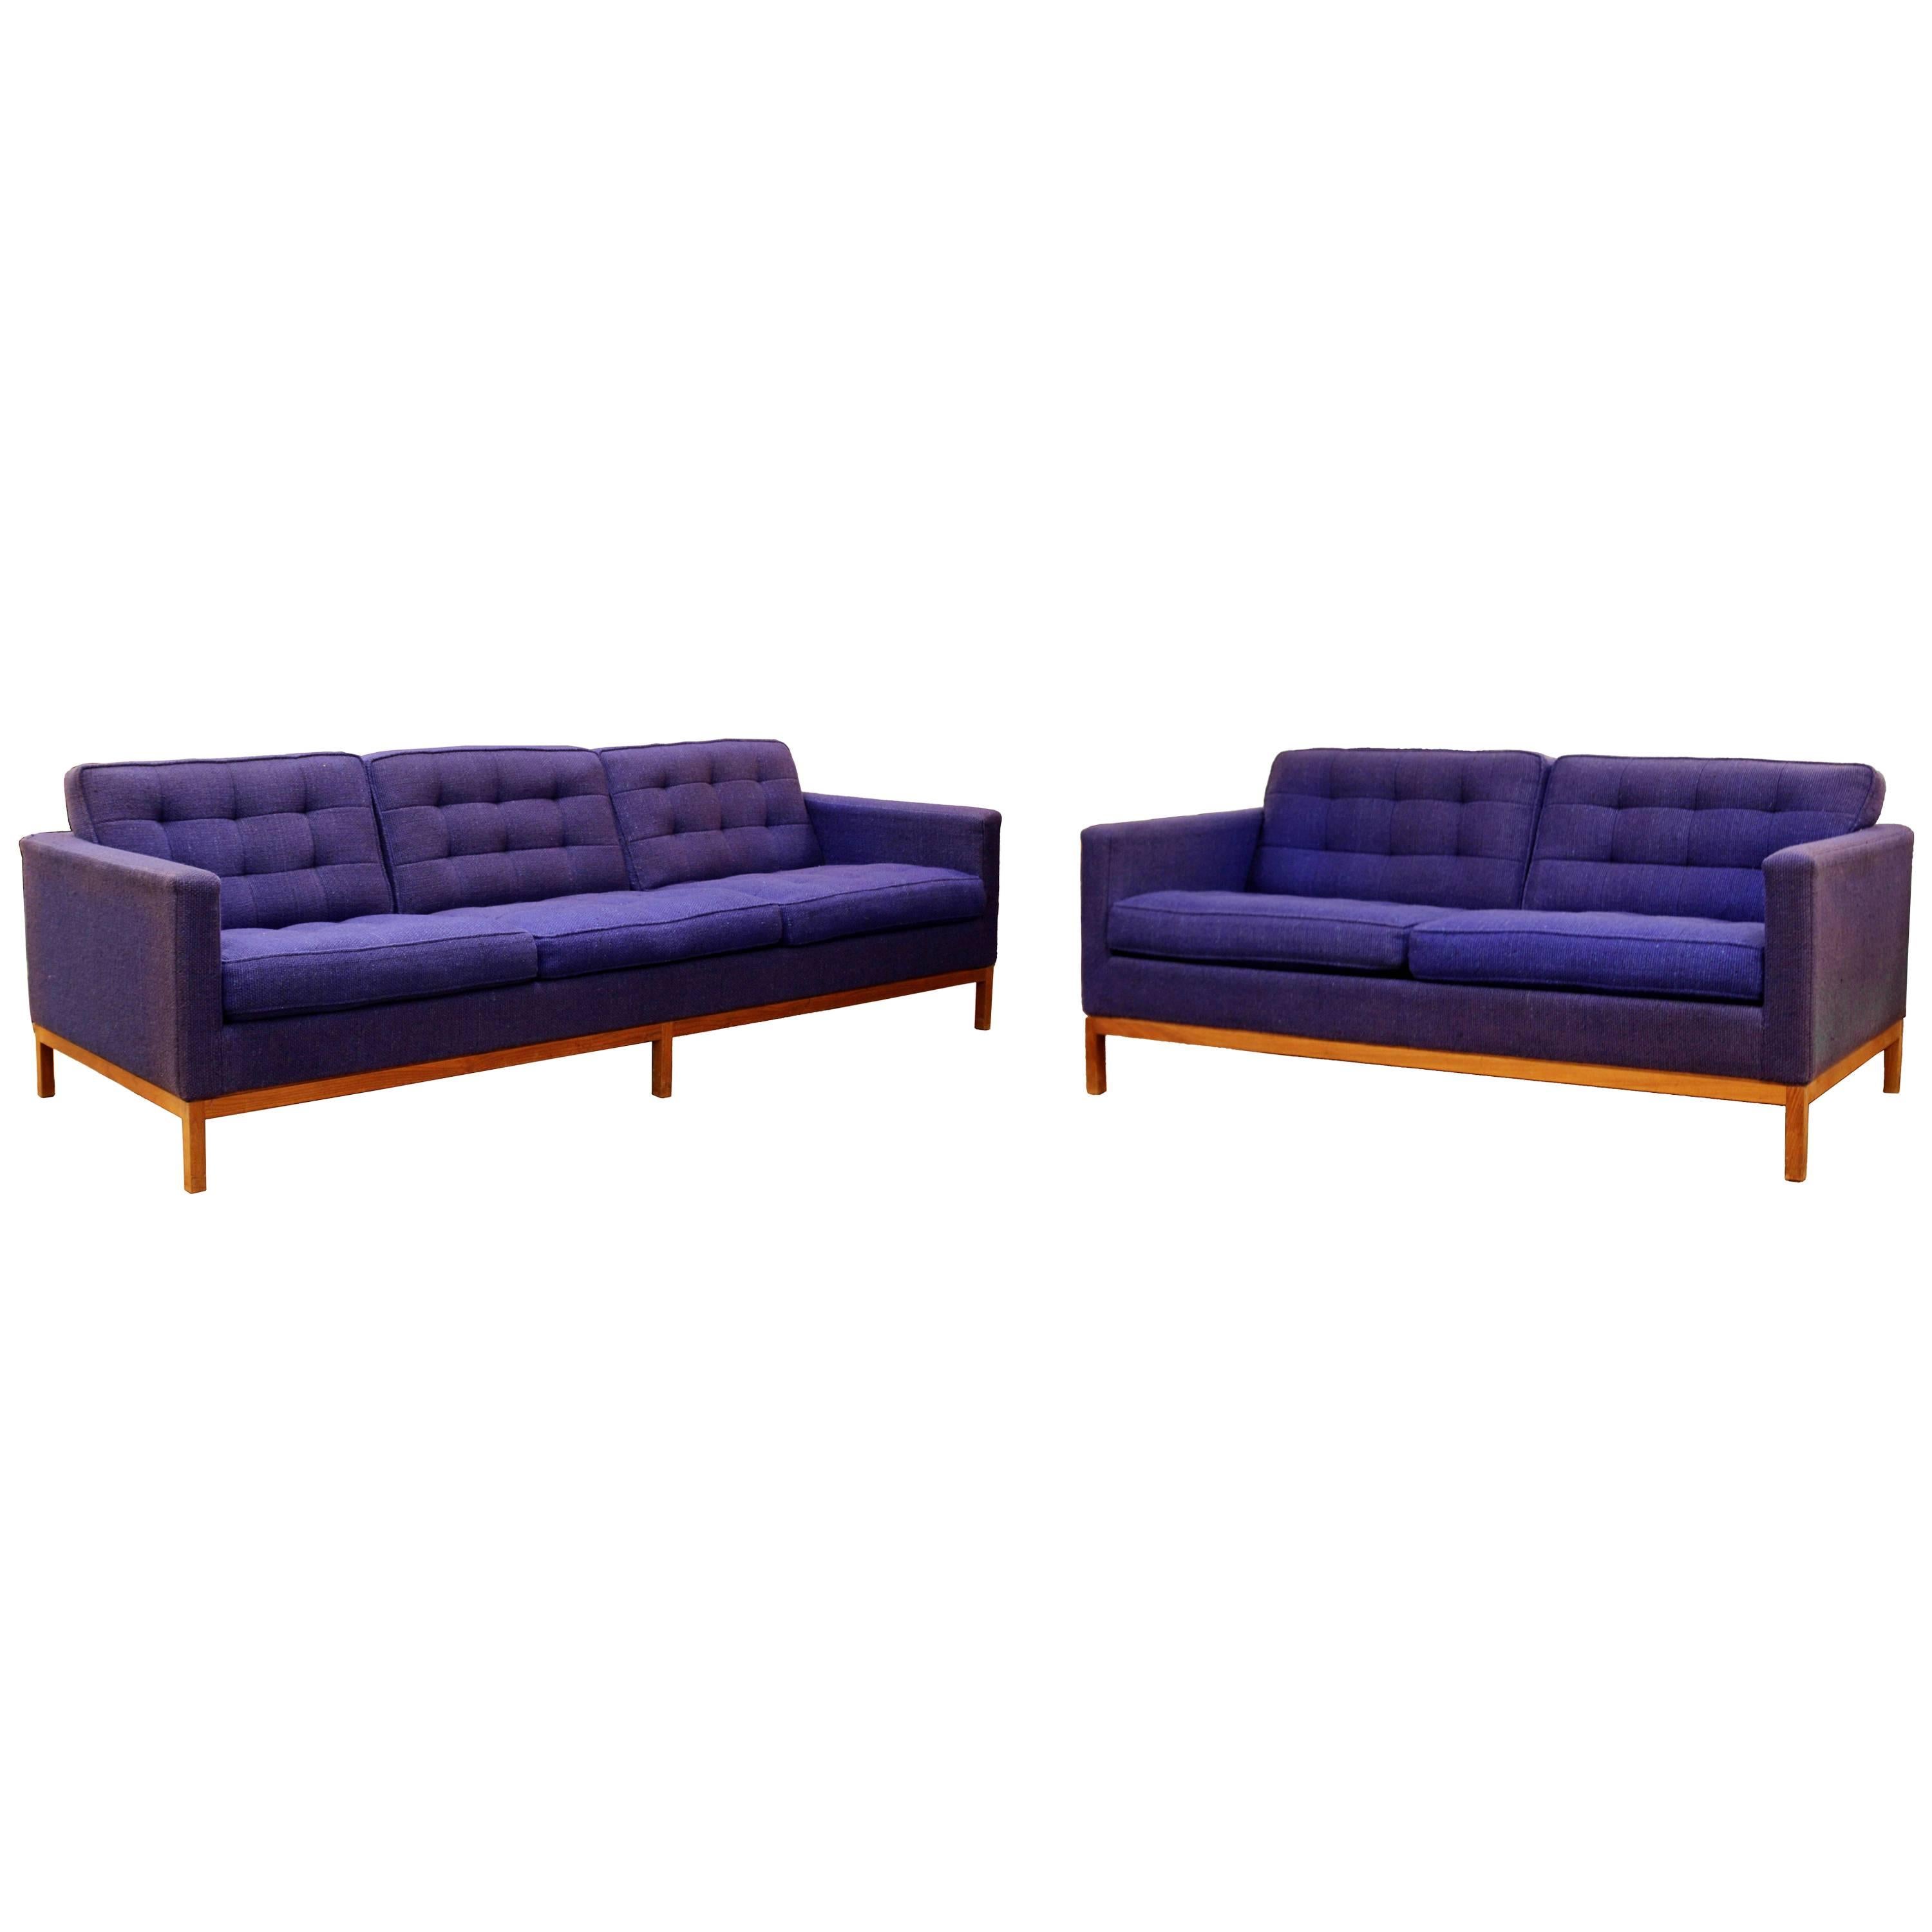 Mid-Century Modern Florence Knoll Pair of Tufted Loveseat & Sofa Wood Base 1950s